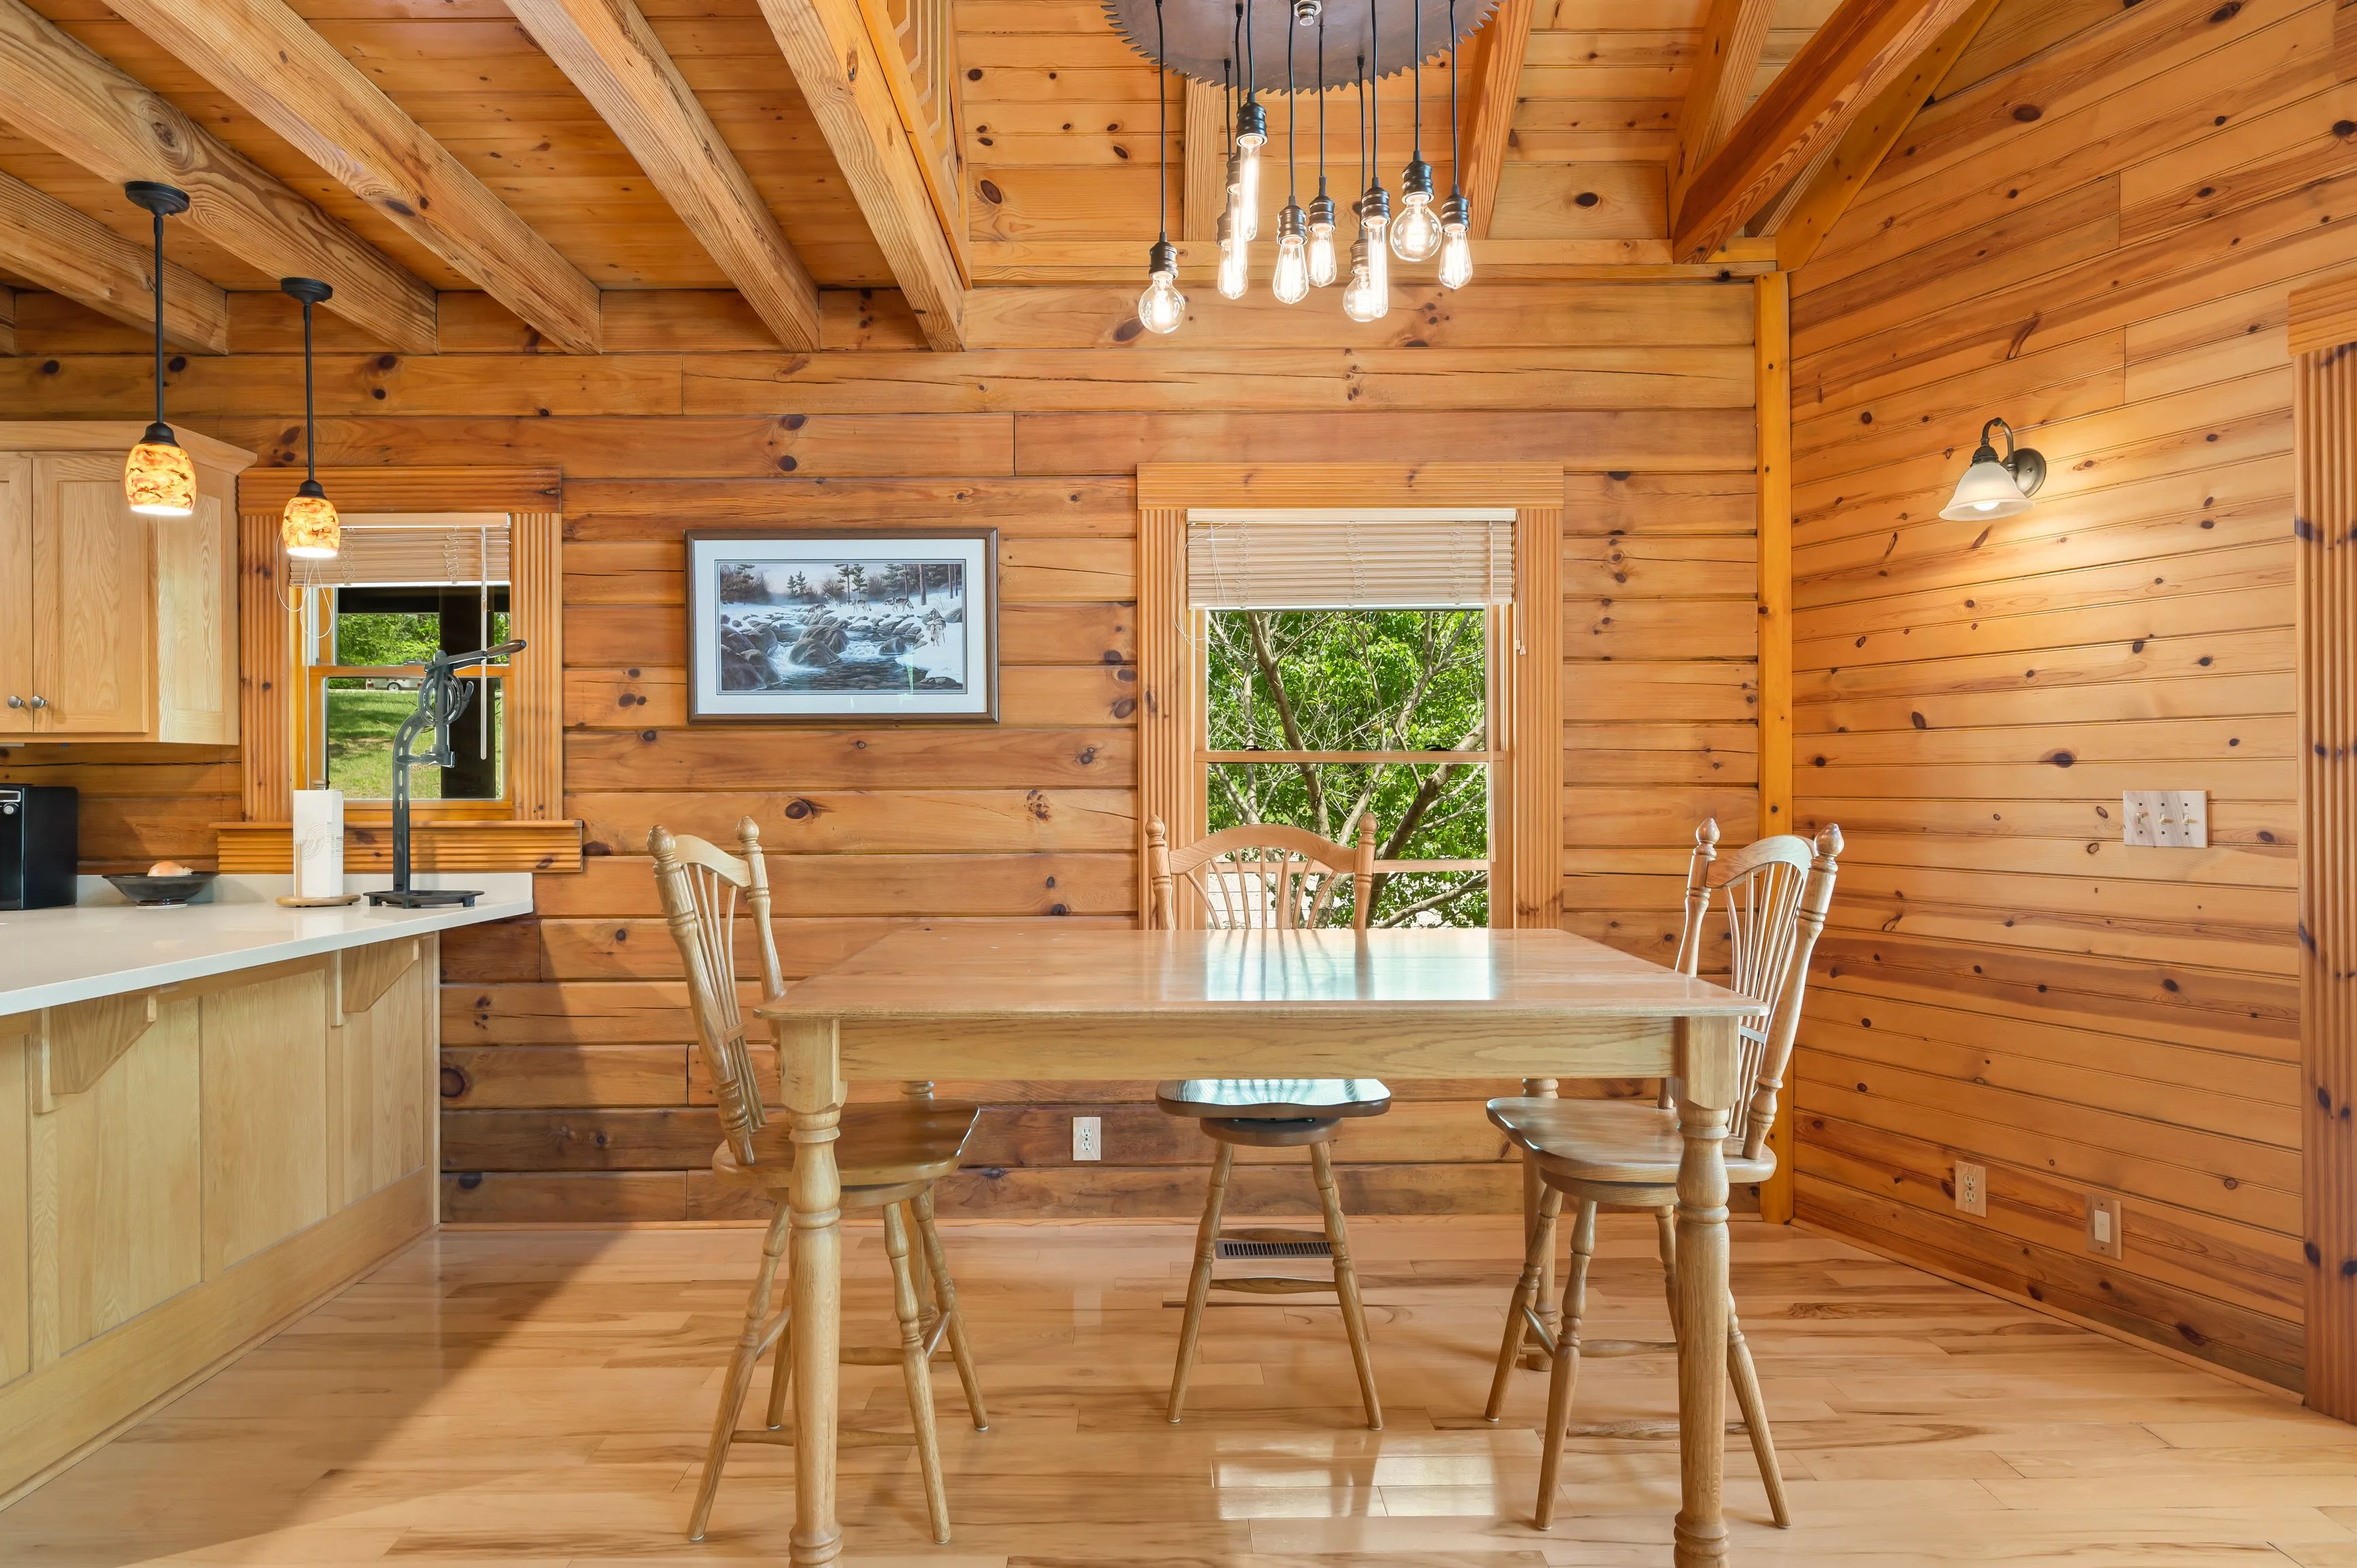 Interior of a cozy wooden cabin kitchen with dining table, chandelier, and kitchen counter.